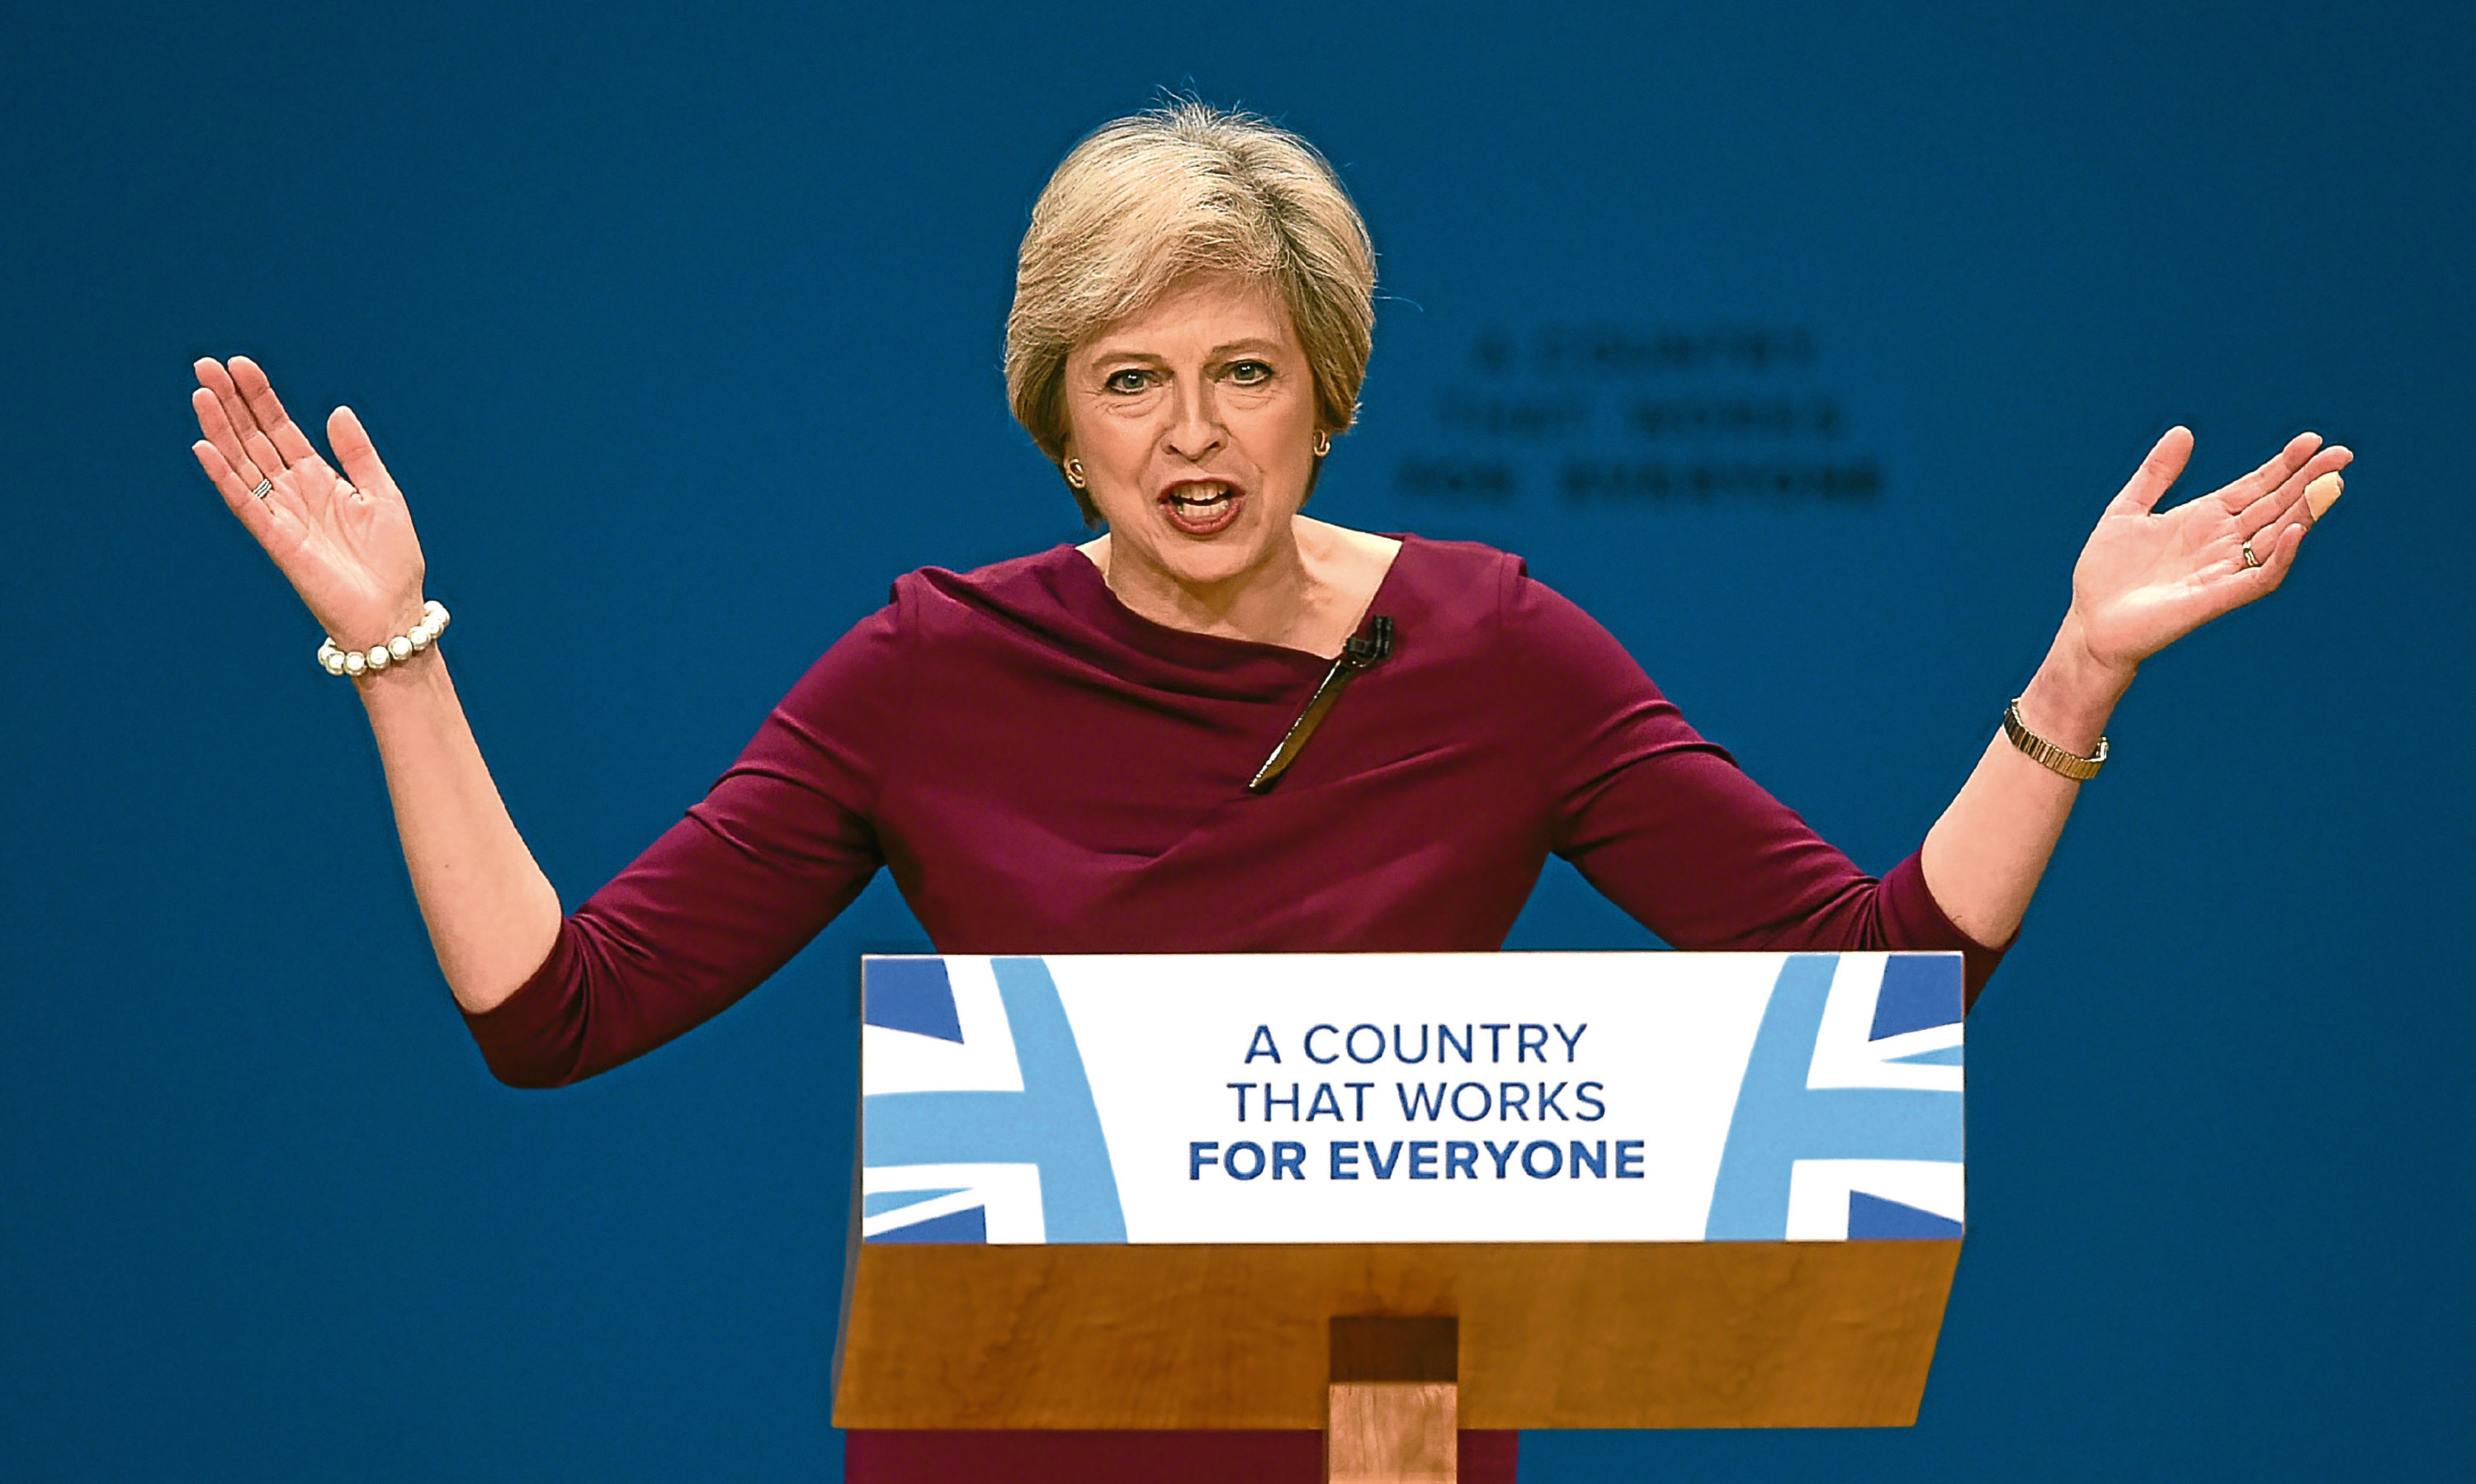 Prime Minister Theresa May speaking at the Conservative Party conference.